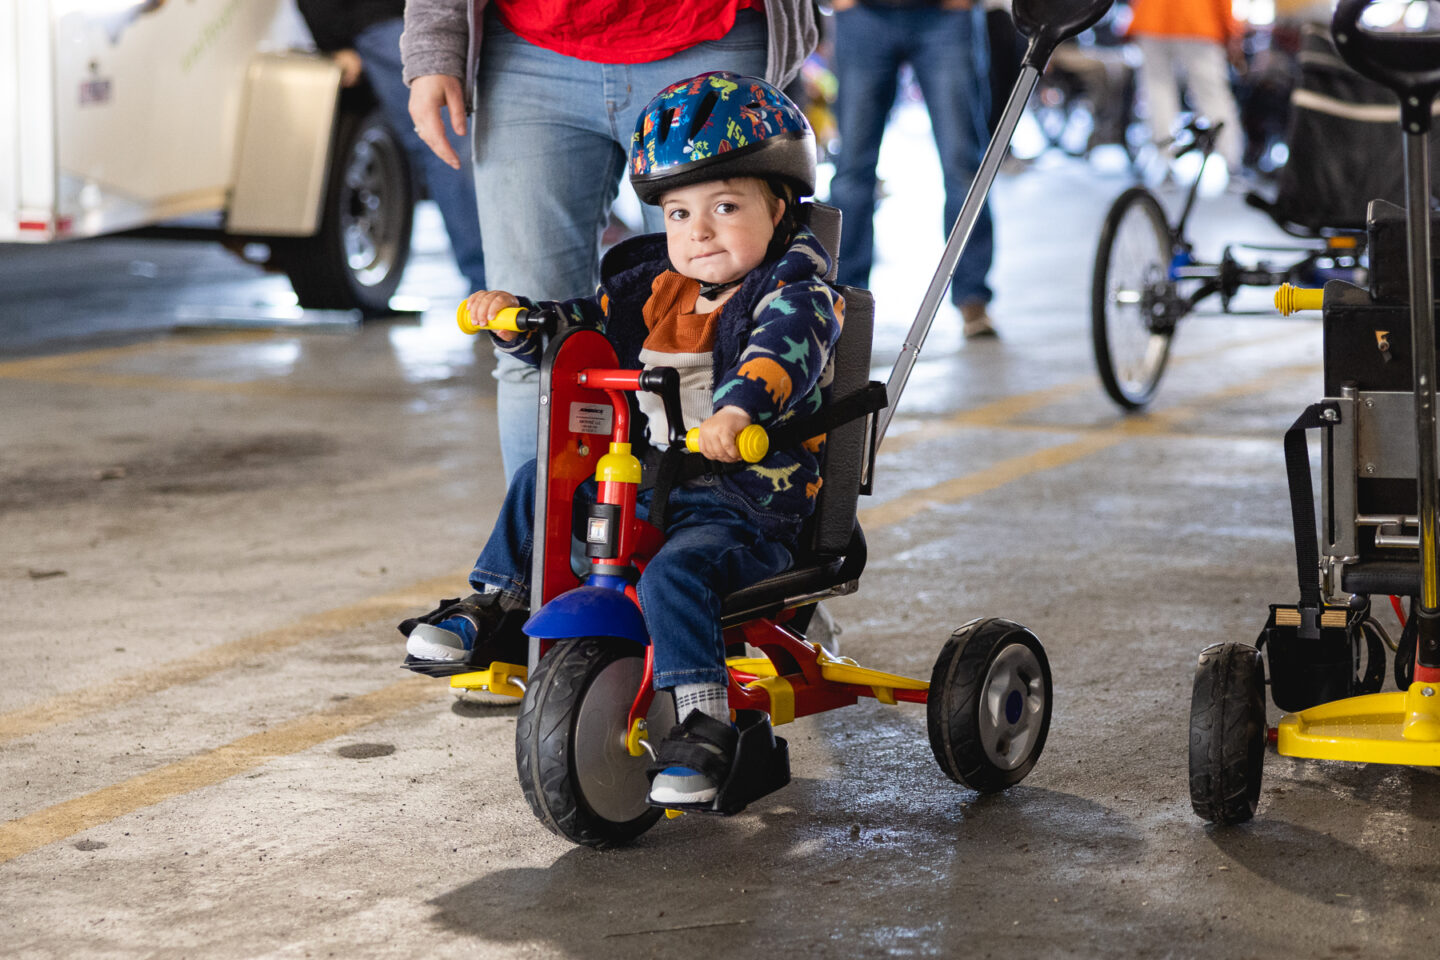 A young child wearing a helmet rides an adaptive tricycle at the Bikes for the Rest of Us event.